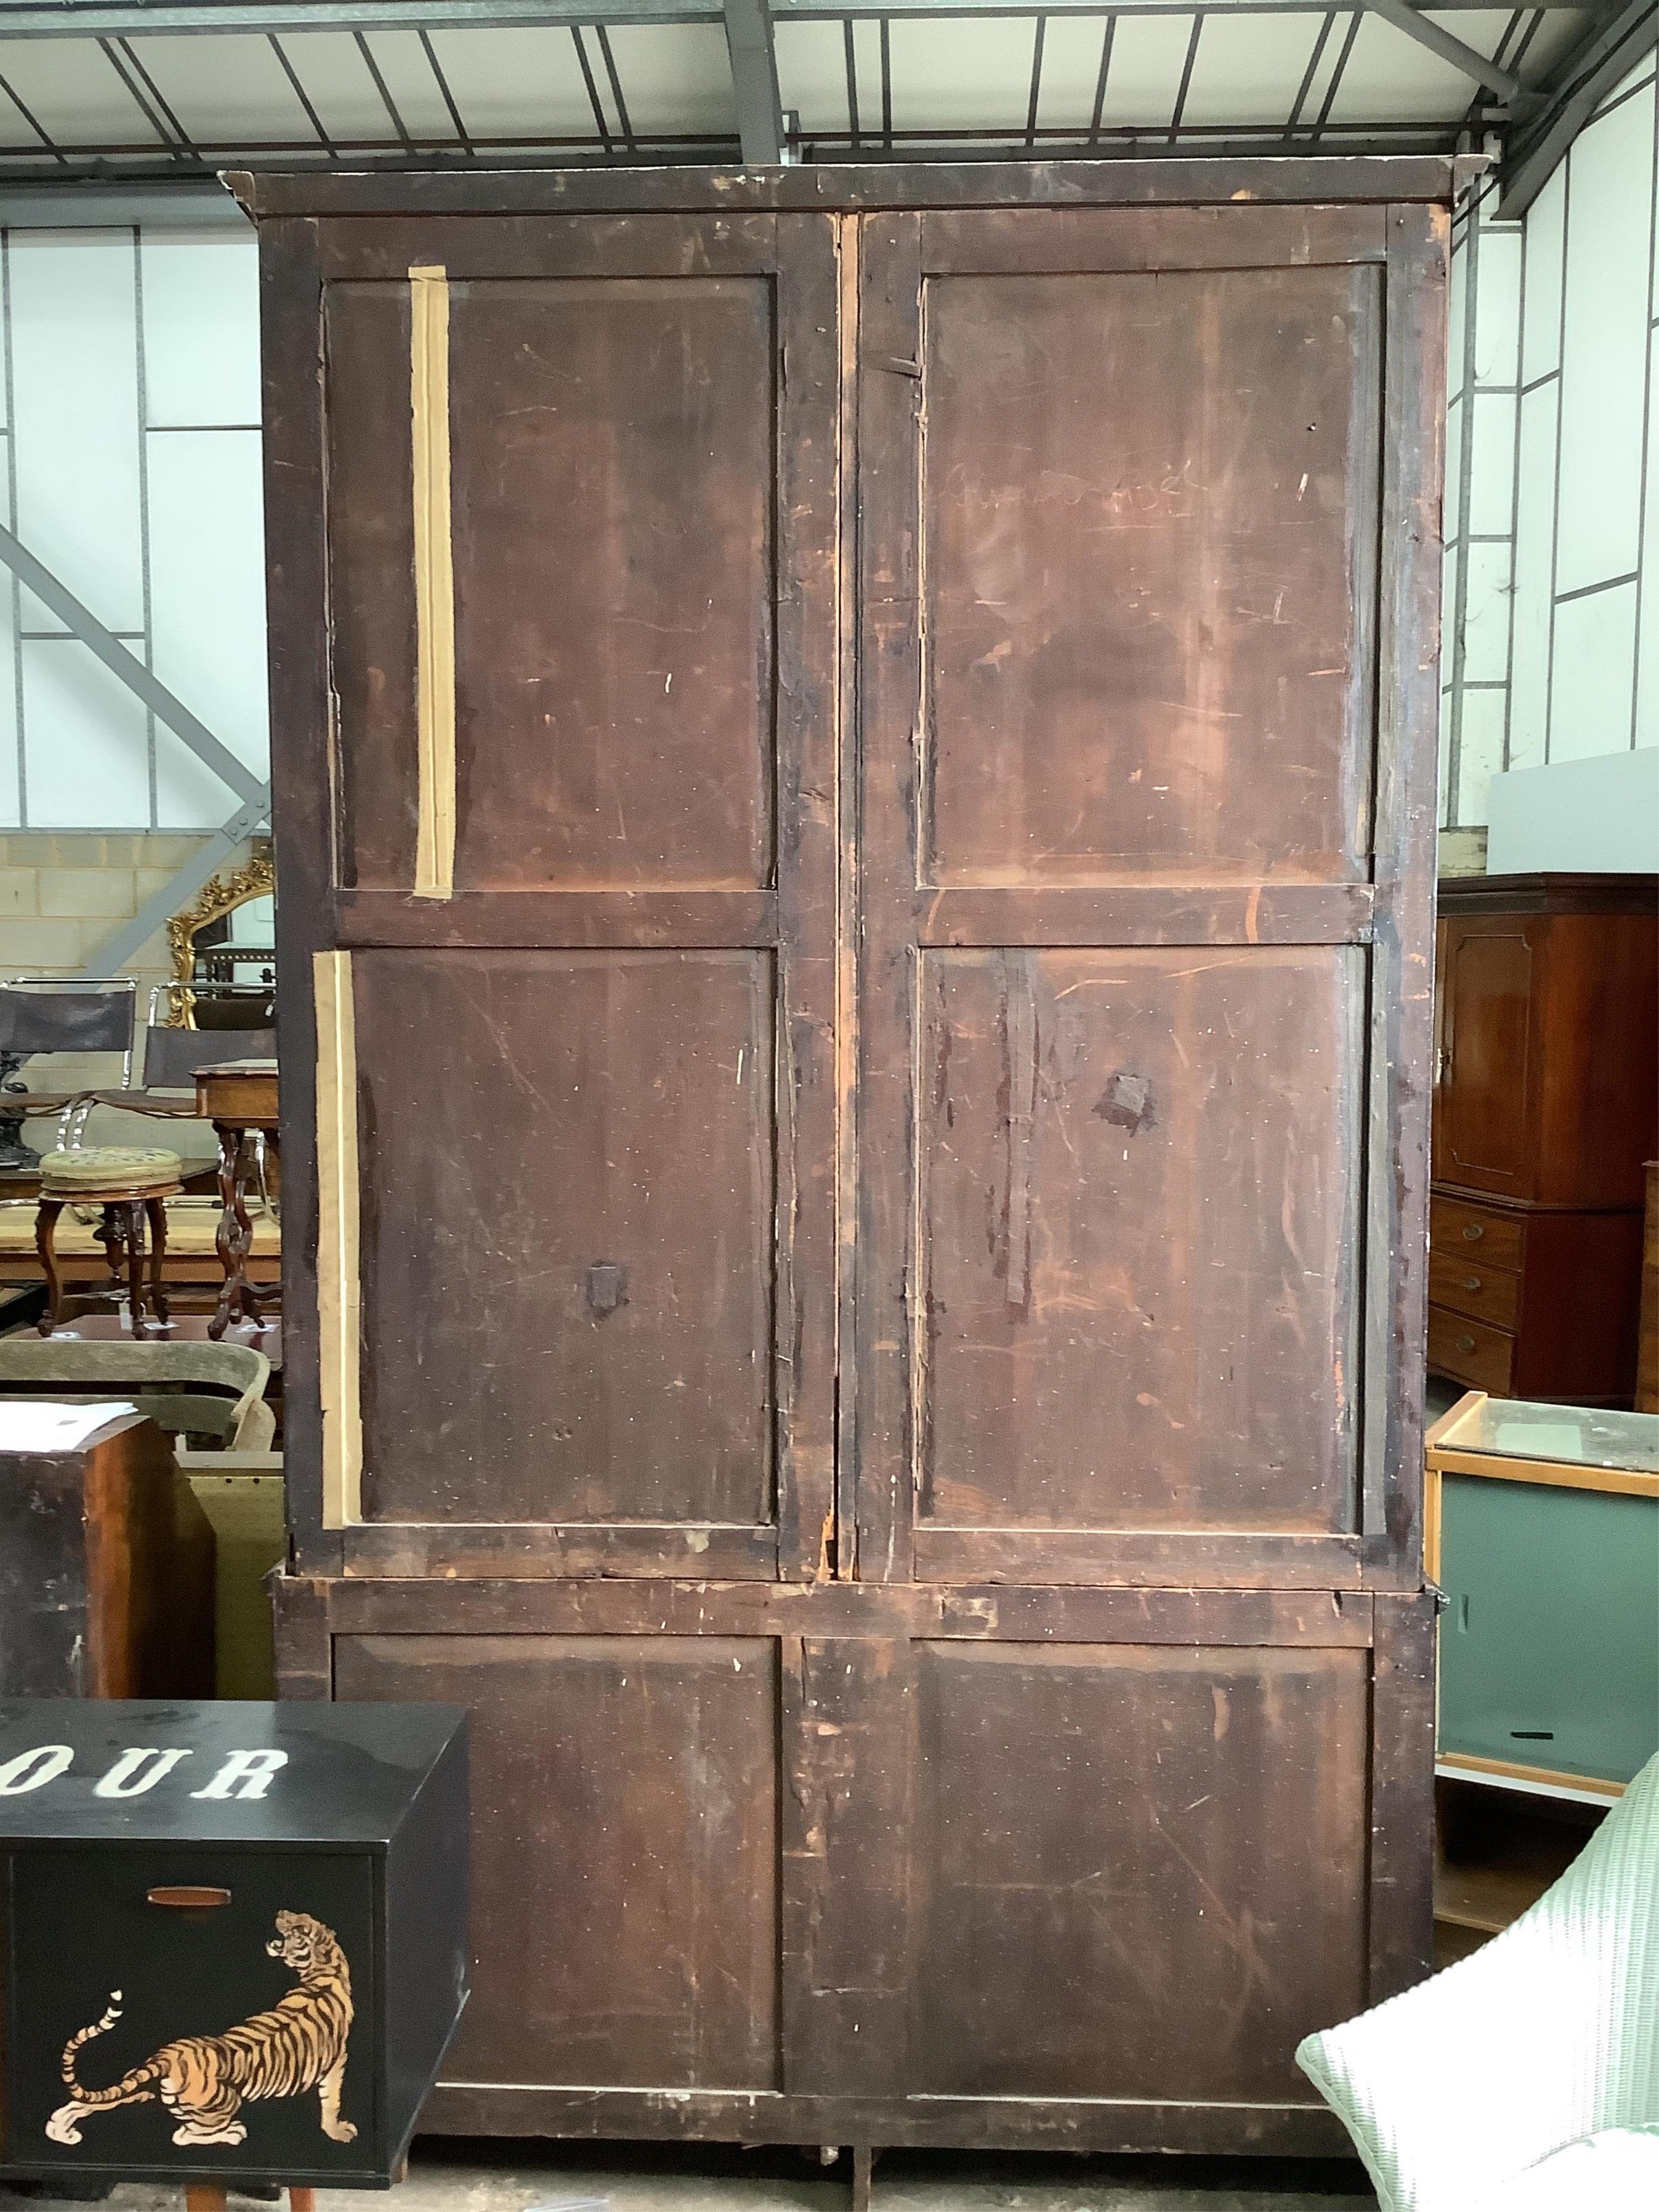 A George III mahogany library bookcase, width 160cm, depth 52cm, height 271cm. Condition - fair